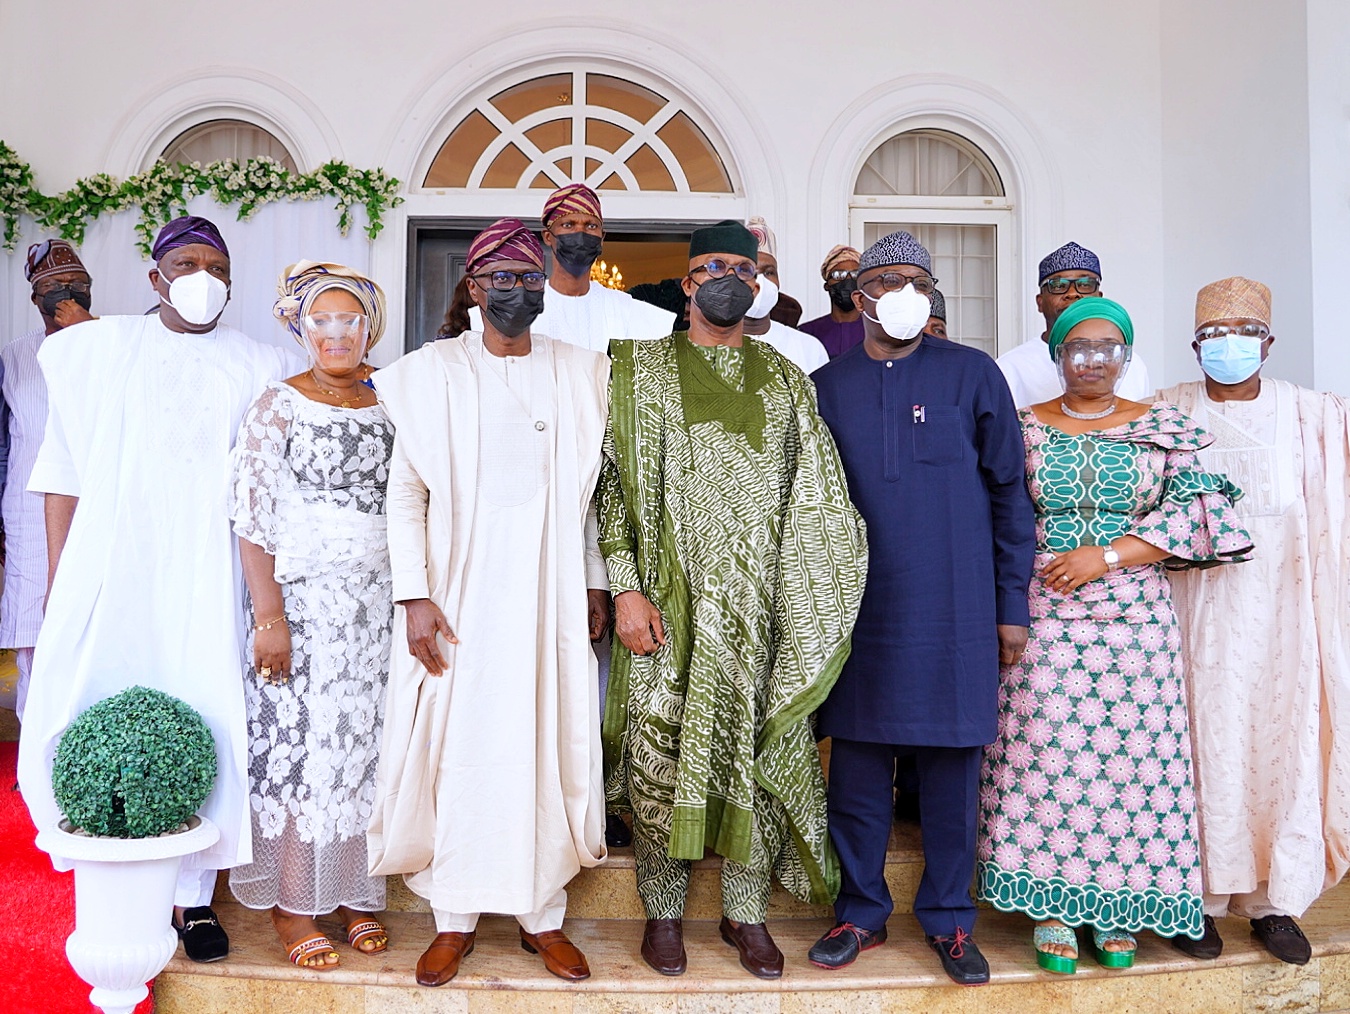 Pictures: Gov. Sanwo-Olu And Members Of The State Cabinet Pay Condolence Visit To Governor Dapo Abiodun Of Ogun State Over His Father’s Demise At Iperu-Remo In Ogun On Sunday, August 22, 2021